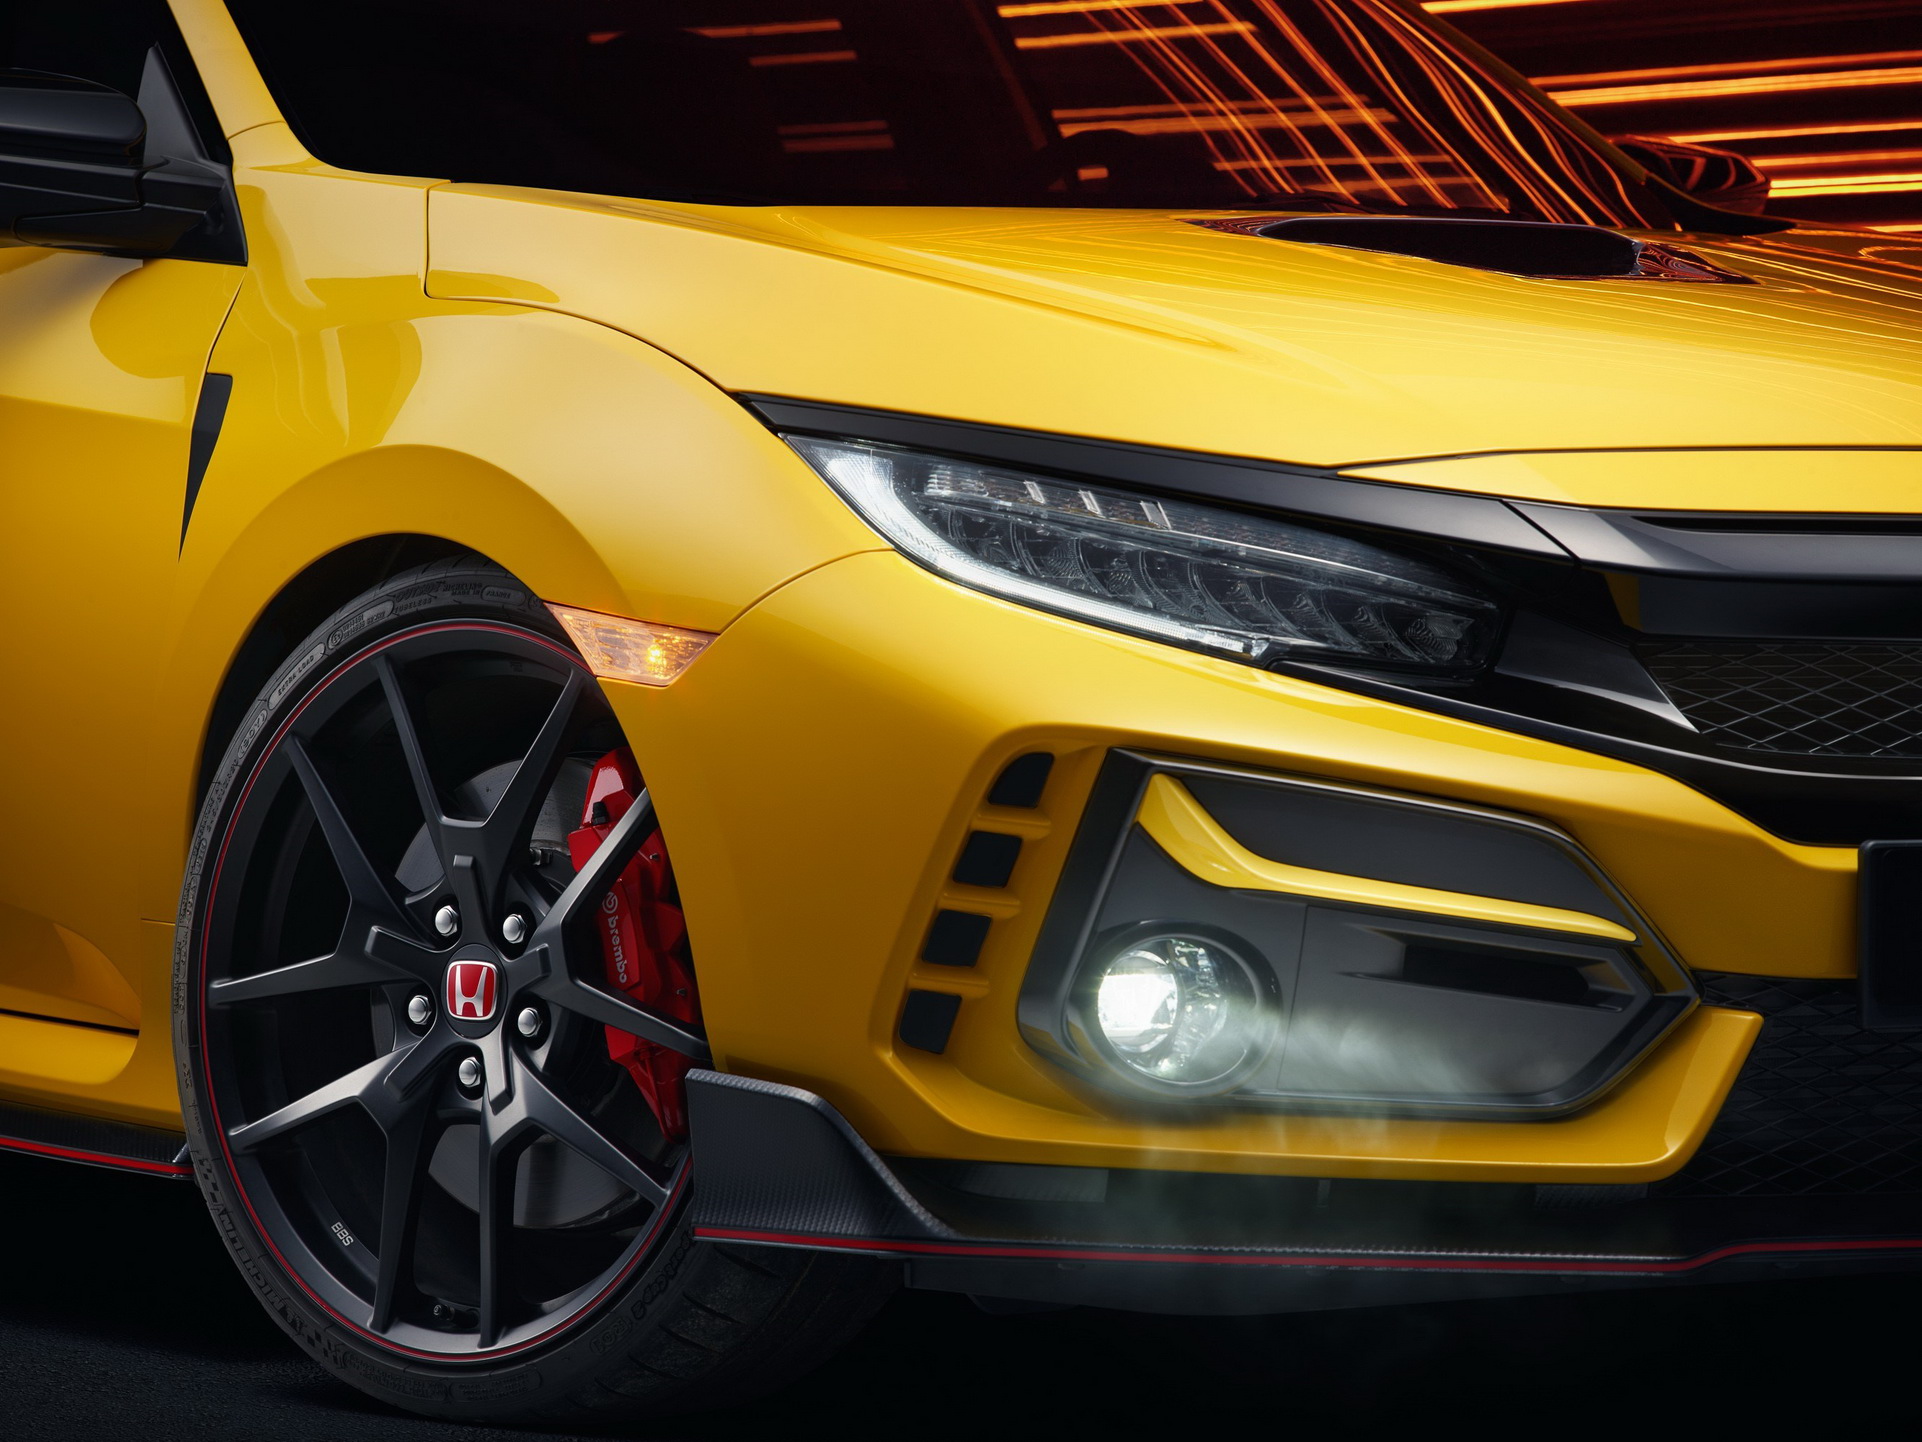 Lighter 21 Honda Civic Type R Limited Edition Promises To Be Ultimate Track Edition Of The Series Carscoops